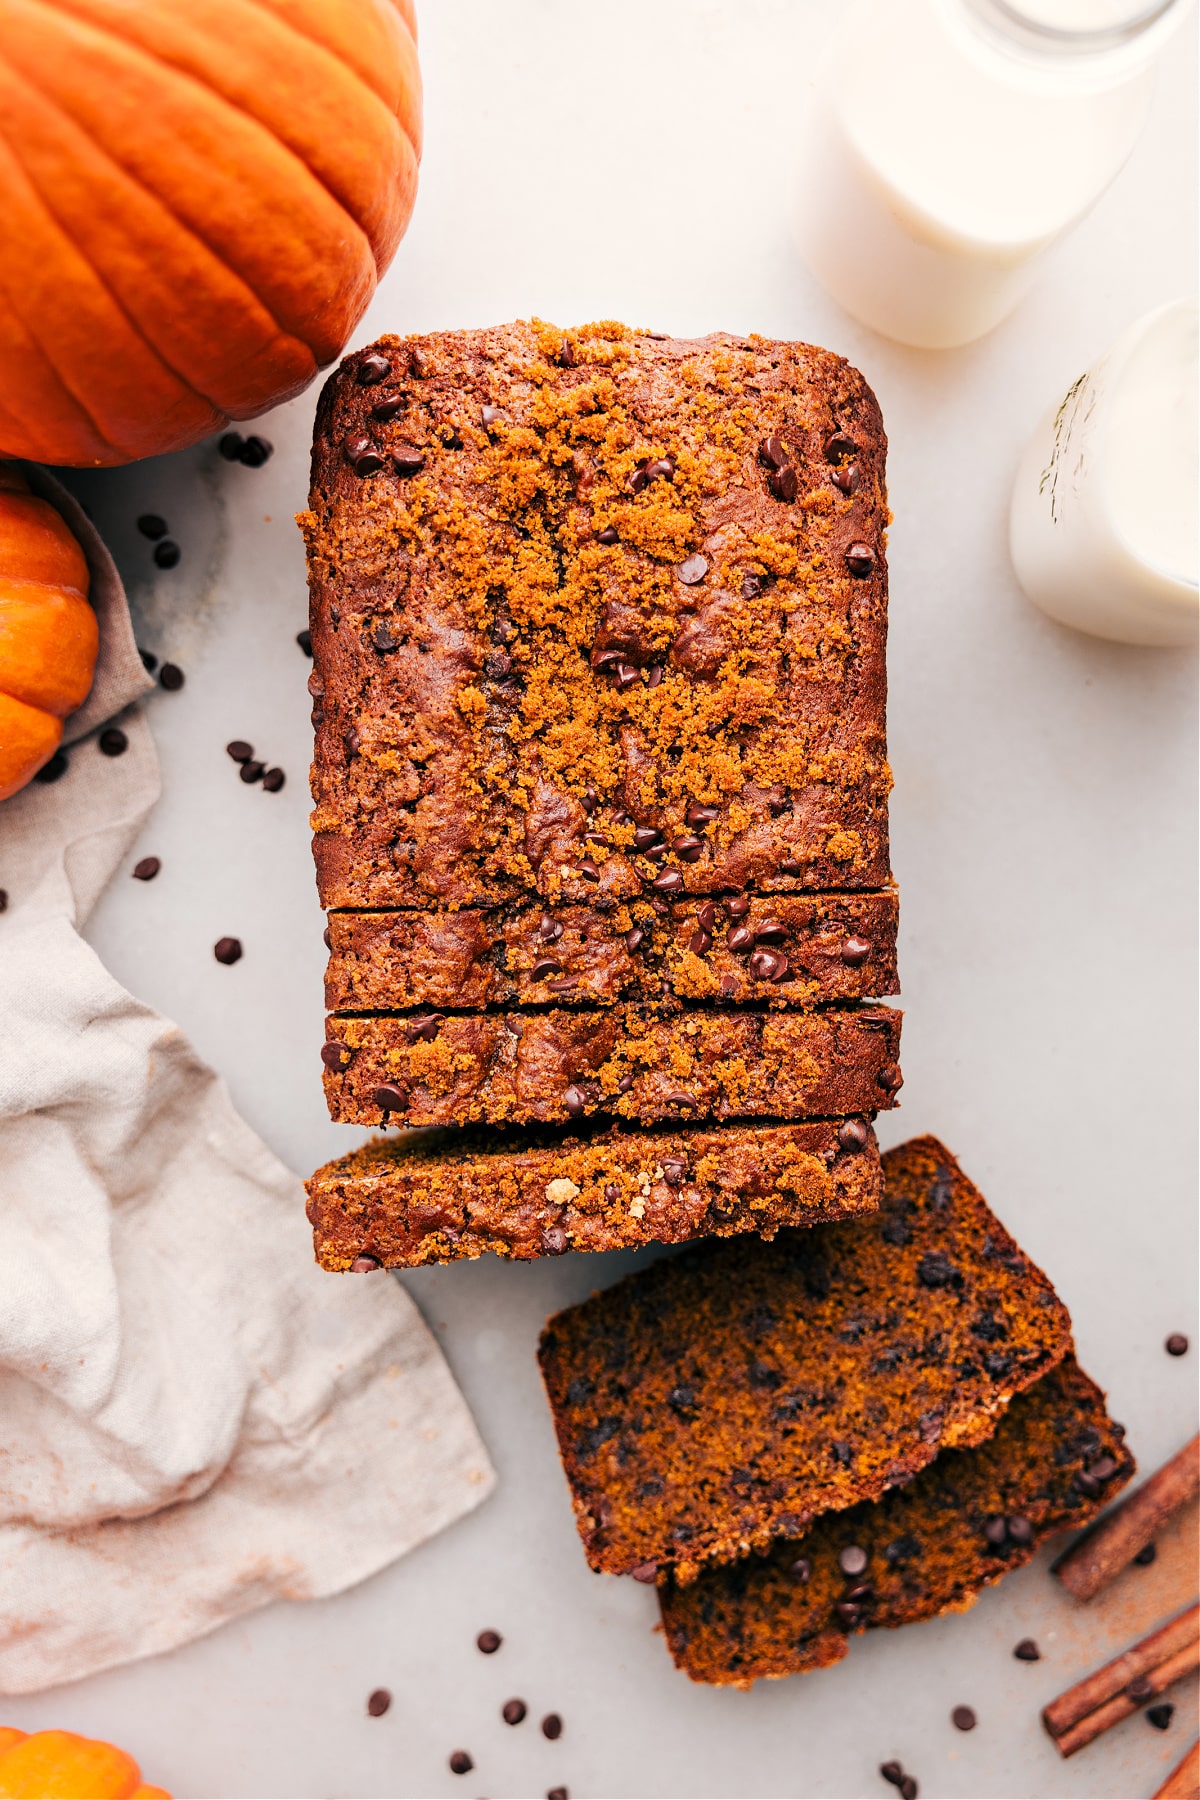 Pumpkin chocolate chip bread with slices cut out, revealing the delicious and fluffy interior.